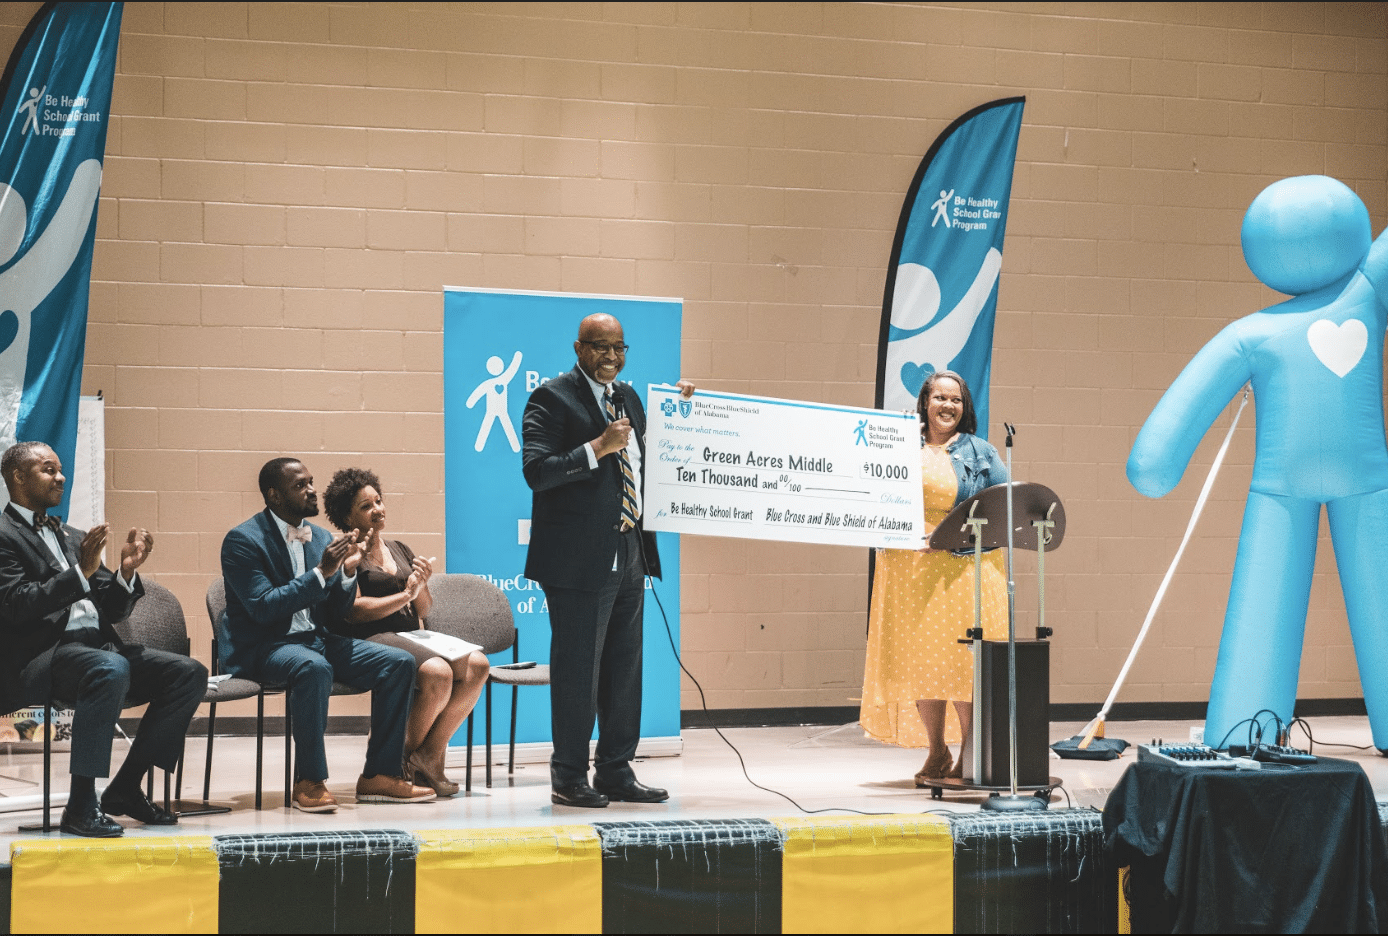 BCBS Be Healthy 1 Green Acres Middle School in Birmingham utilizing $10,000 grant from Blue Cross and Blue Shield of Alabama for 6th grade health programs